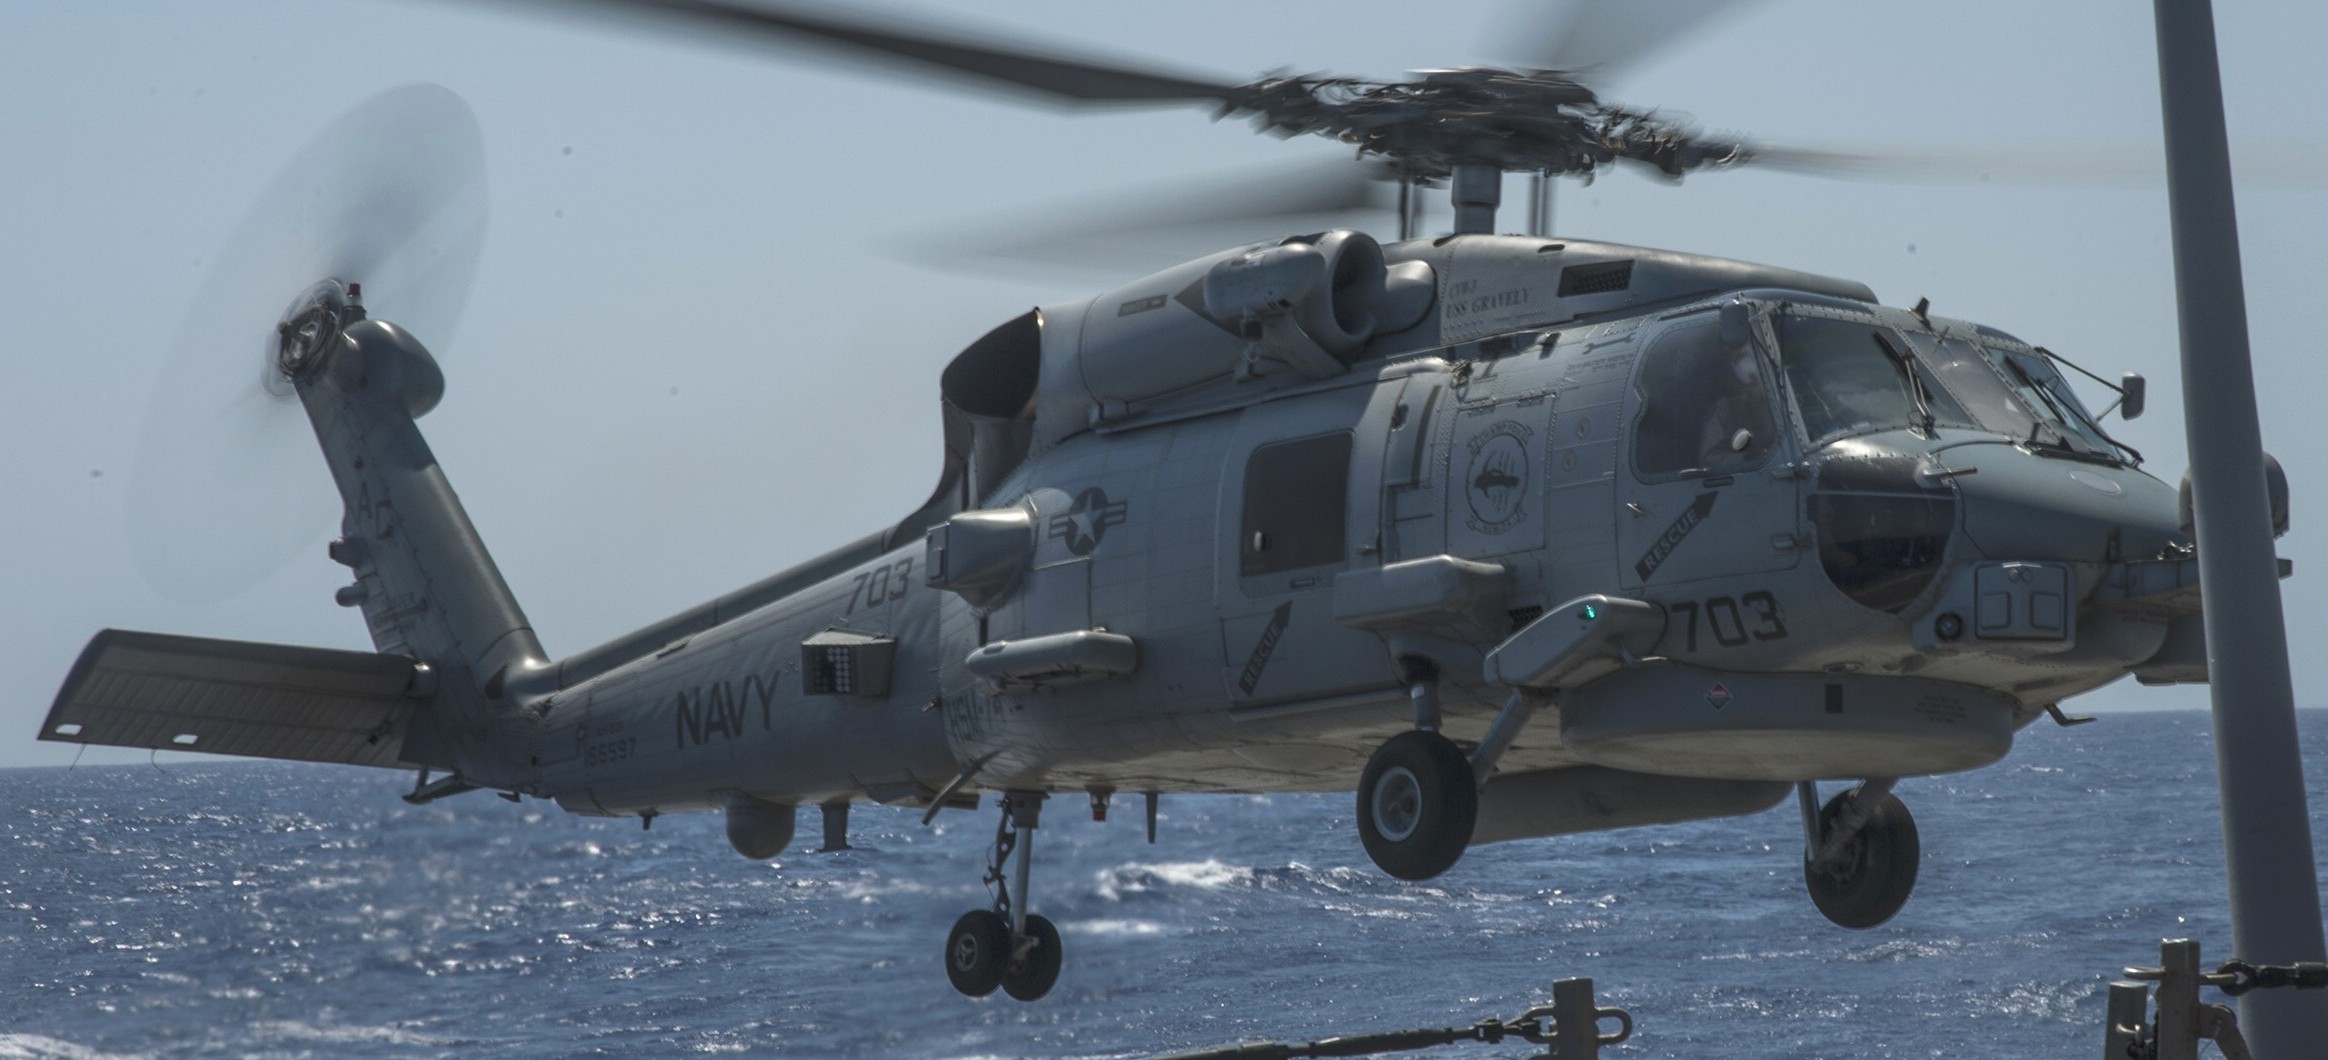 hsm-74 swamp foxes helicopter maritime strike squadron us navy mh-60r seahawk 2013 83